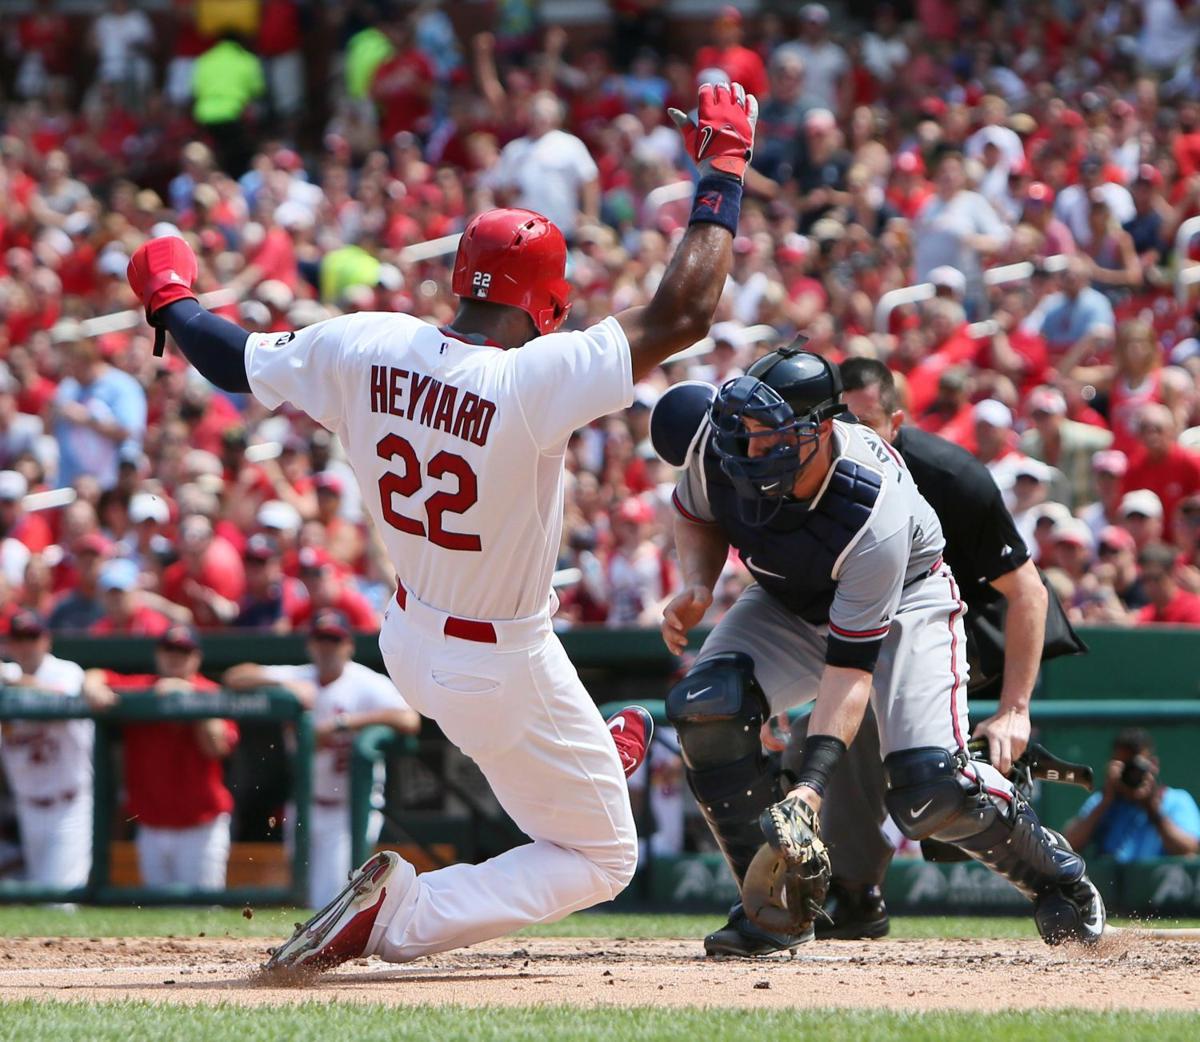 Cardinals power past Mets 11-4 for 3-game sweep